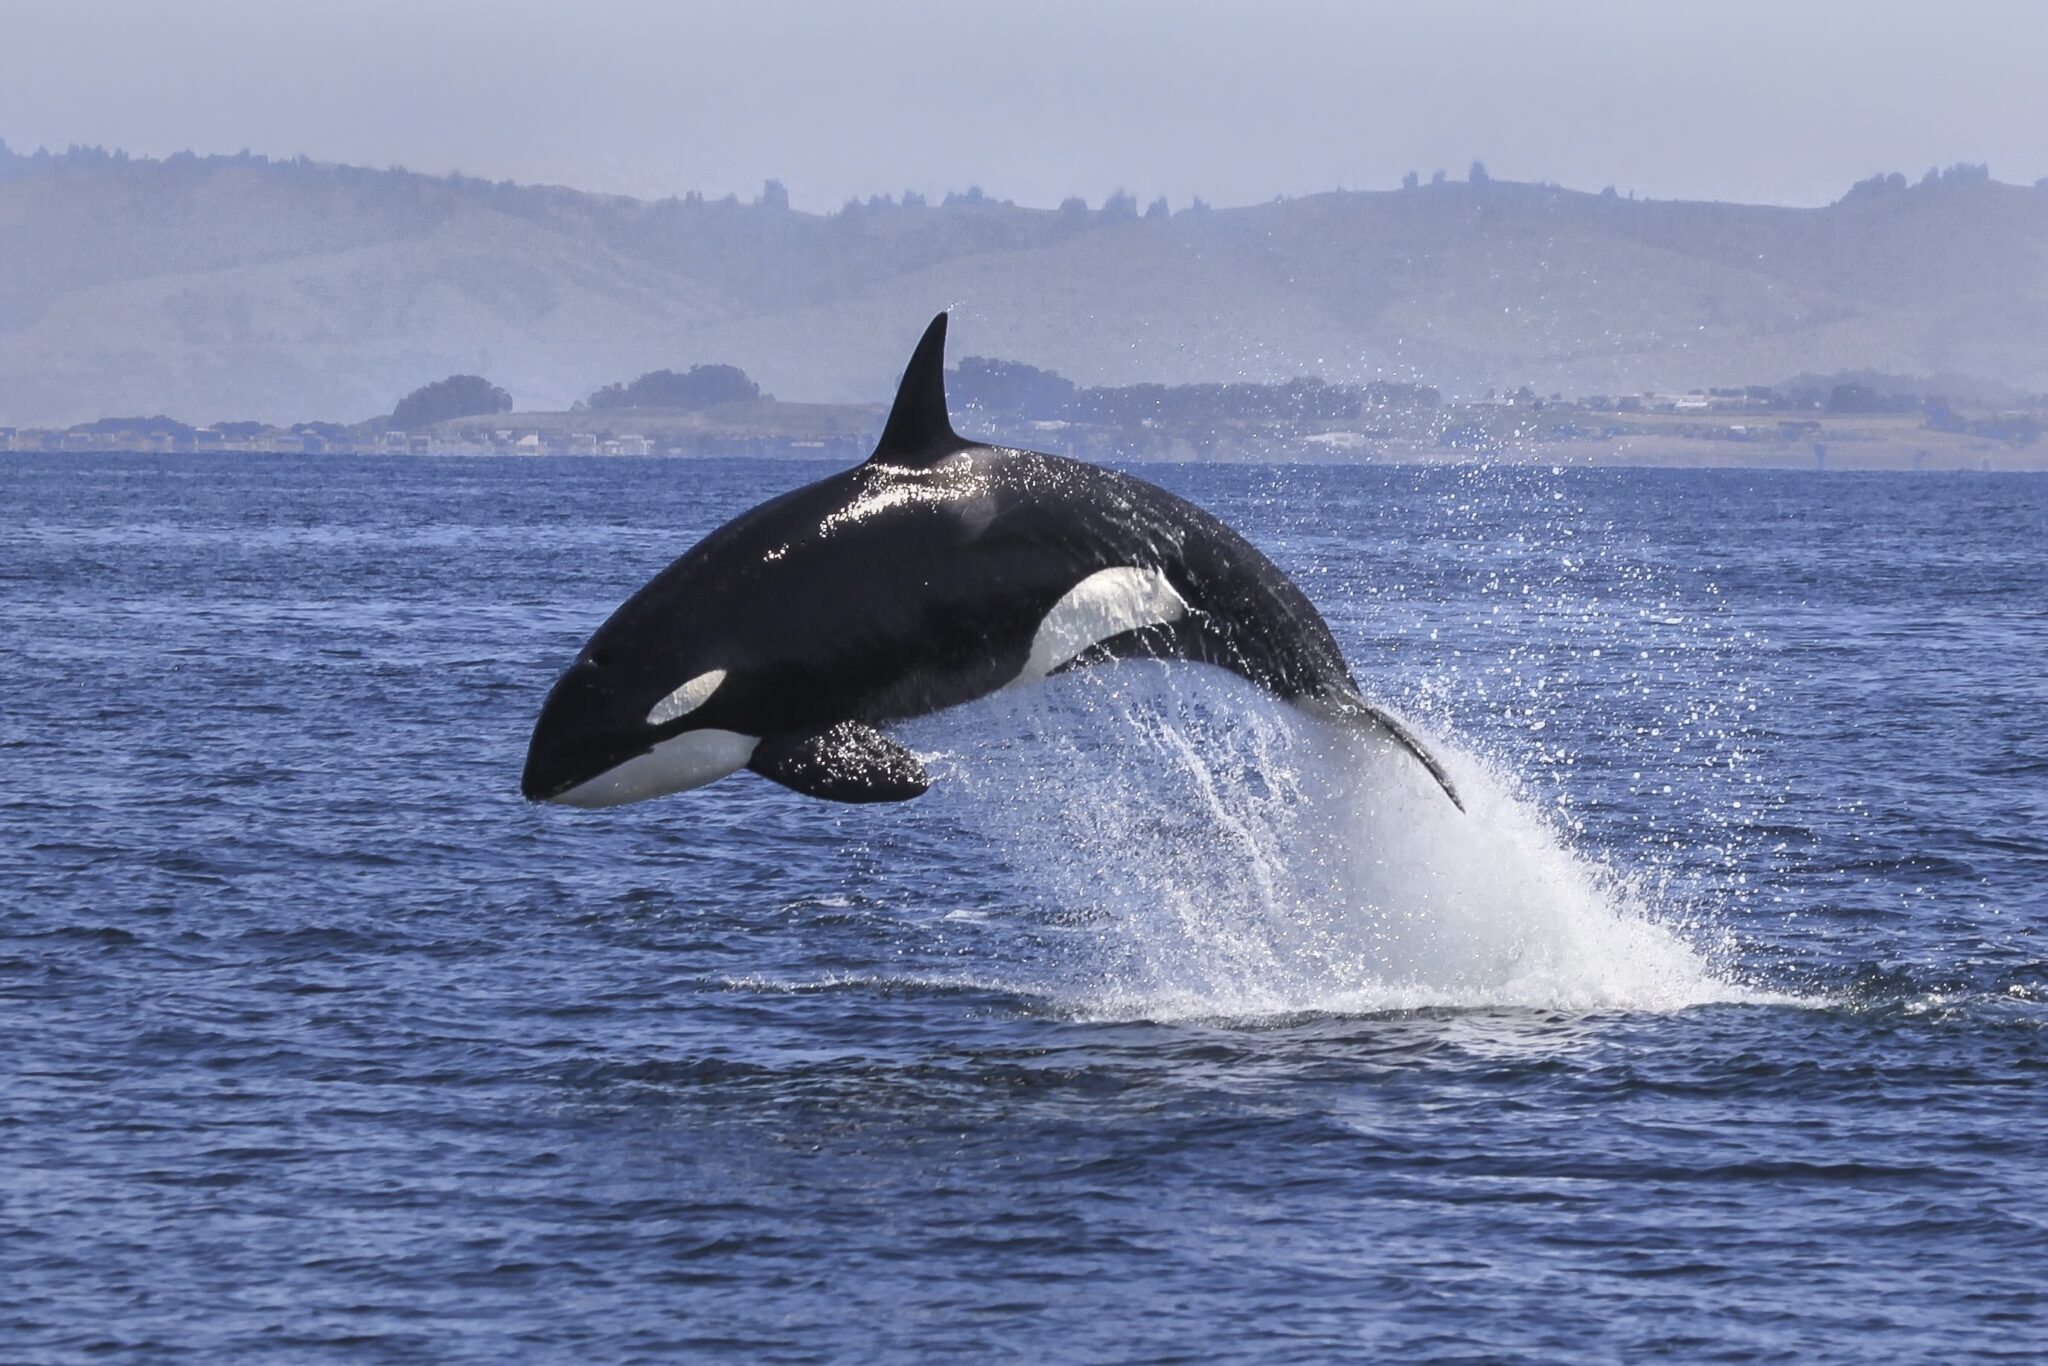 An orca (also called a killer whale or blackfish) breaching, and an example of the same animals with different names